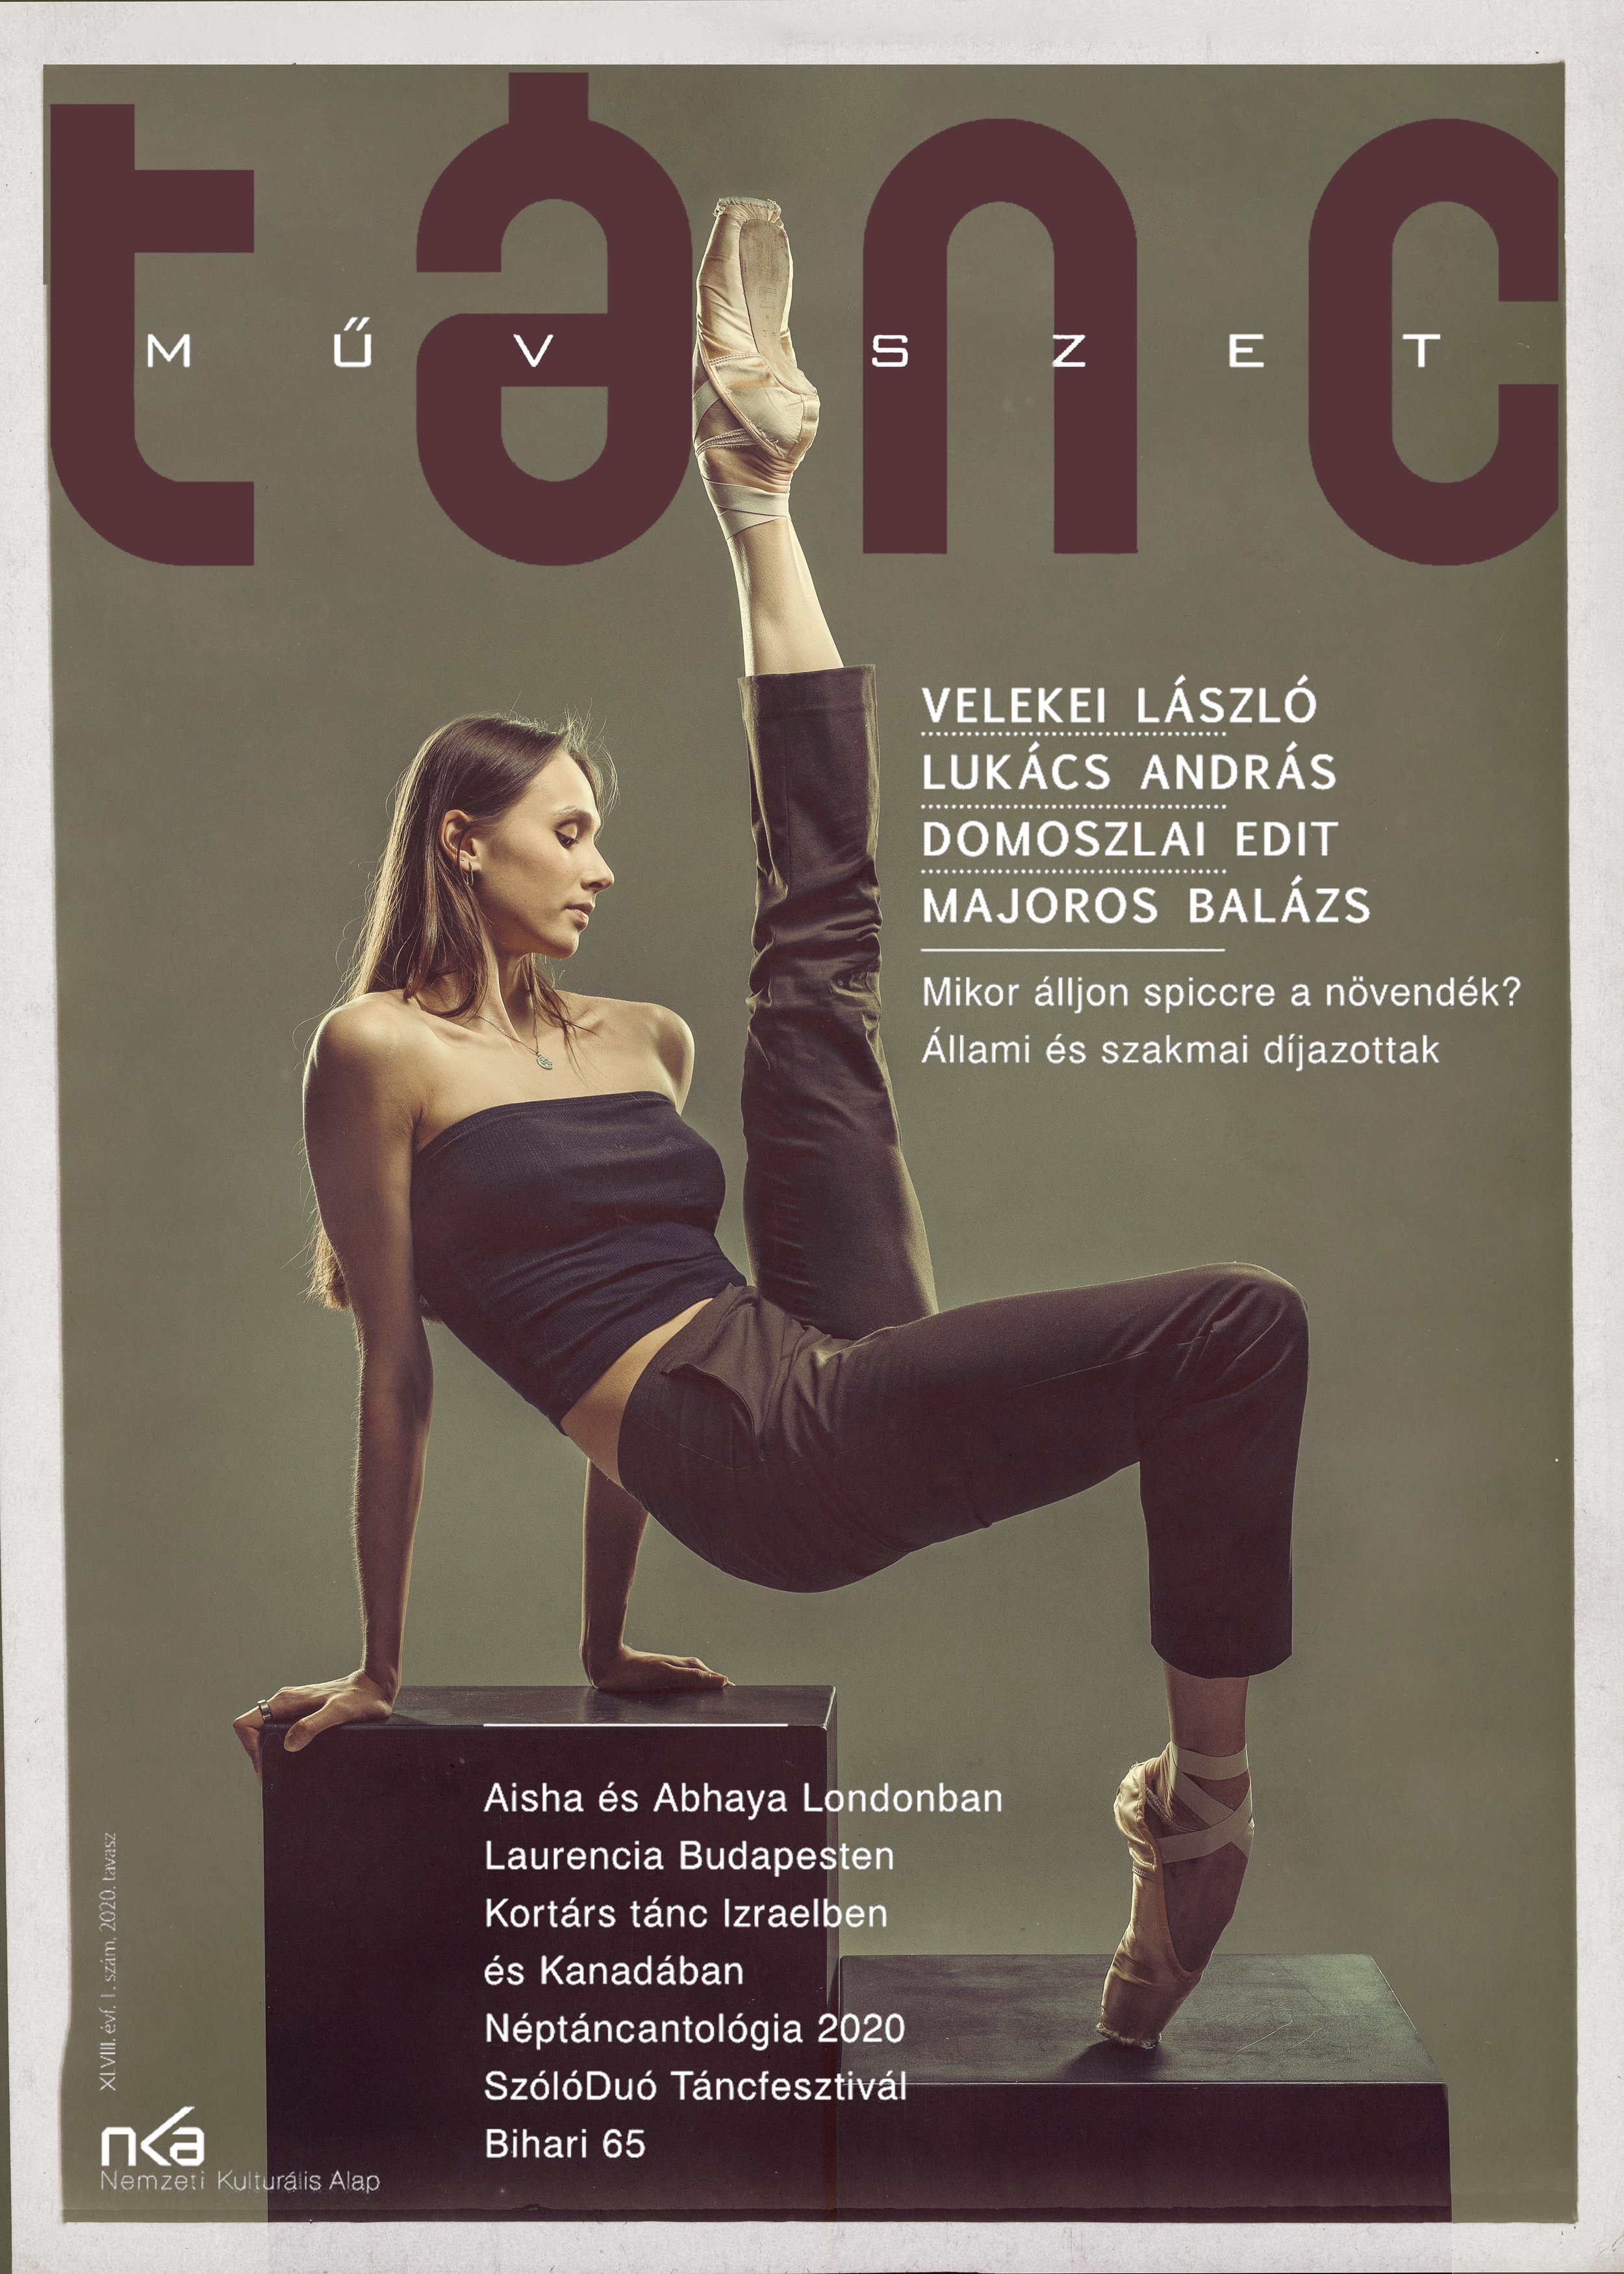 Cover test for the Dance Art Magazine